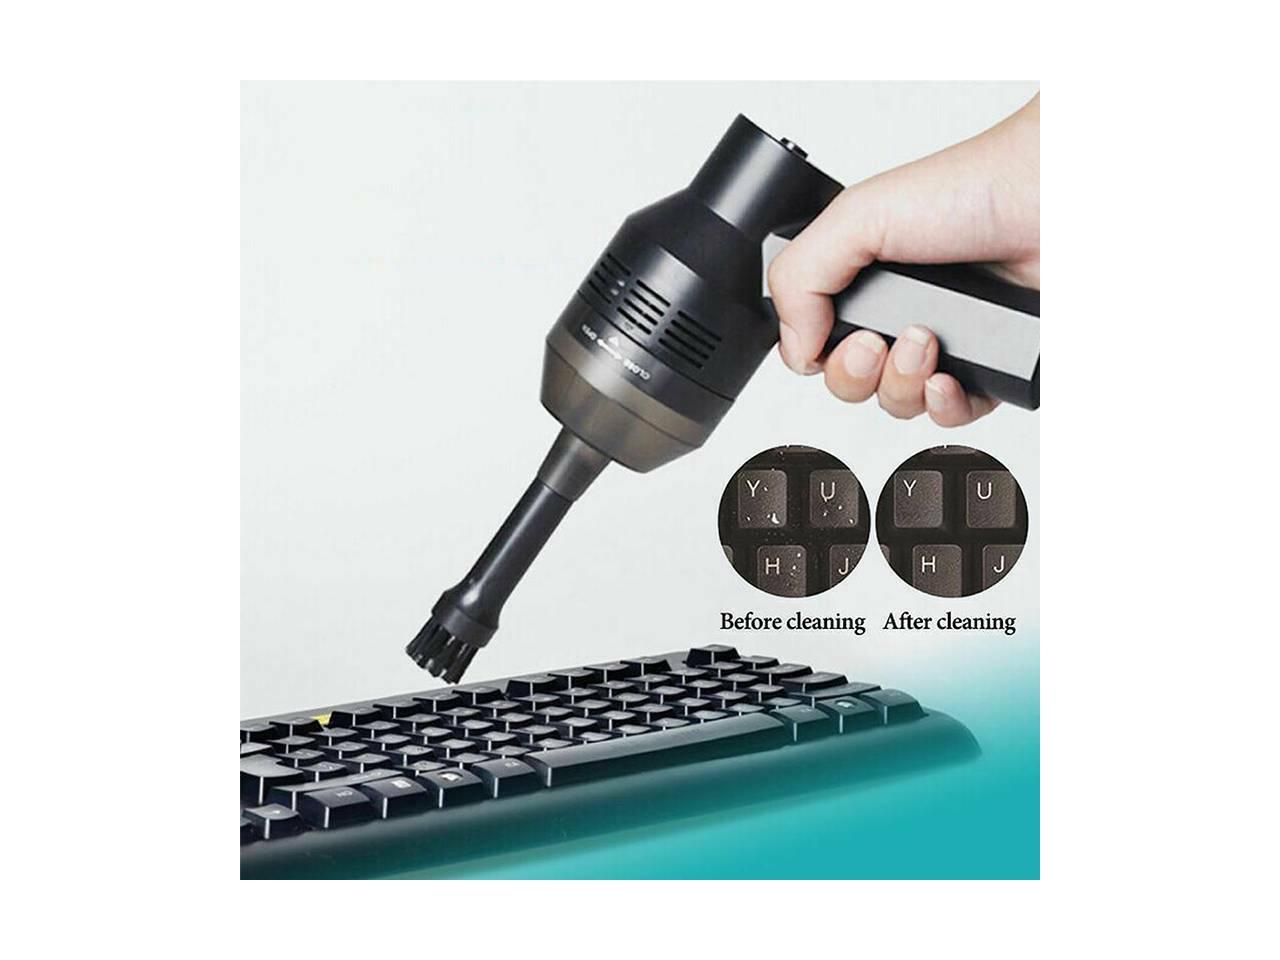 Computer Piano Car Keyboard Cleaner Mini Powerful Keyboard Vacuum USB Cordless Computer Vacuum Cleaner with 2 Vacuum Nozzles & 2 Washable Filters for Laptop Makeup Bag Pet House